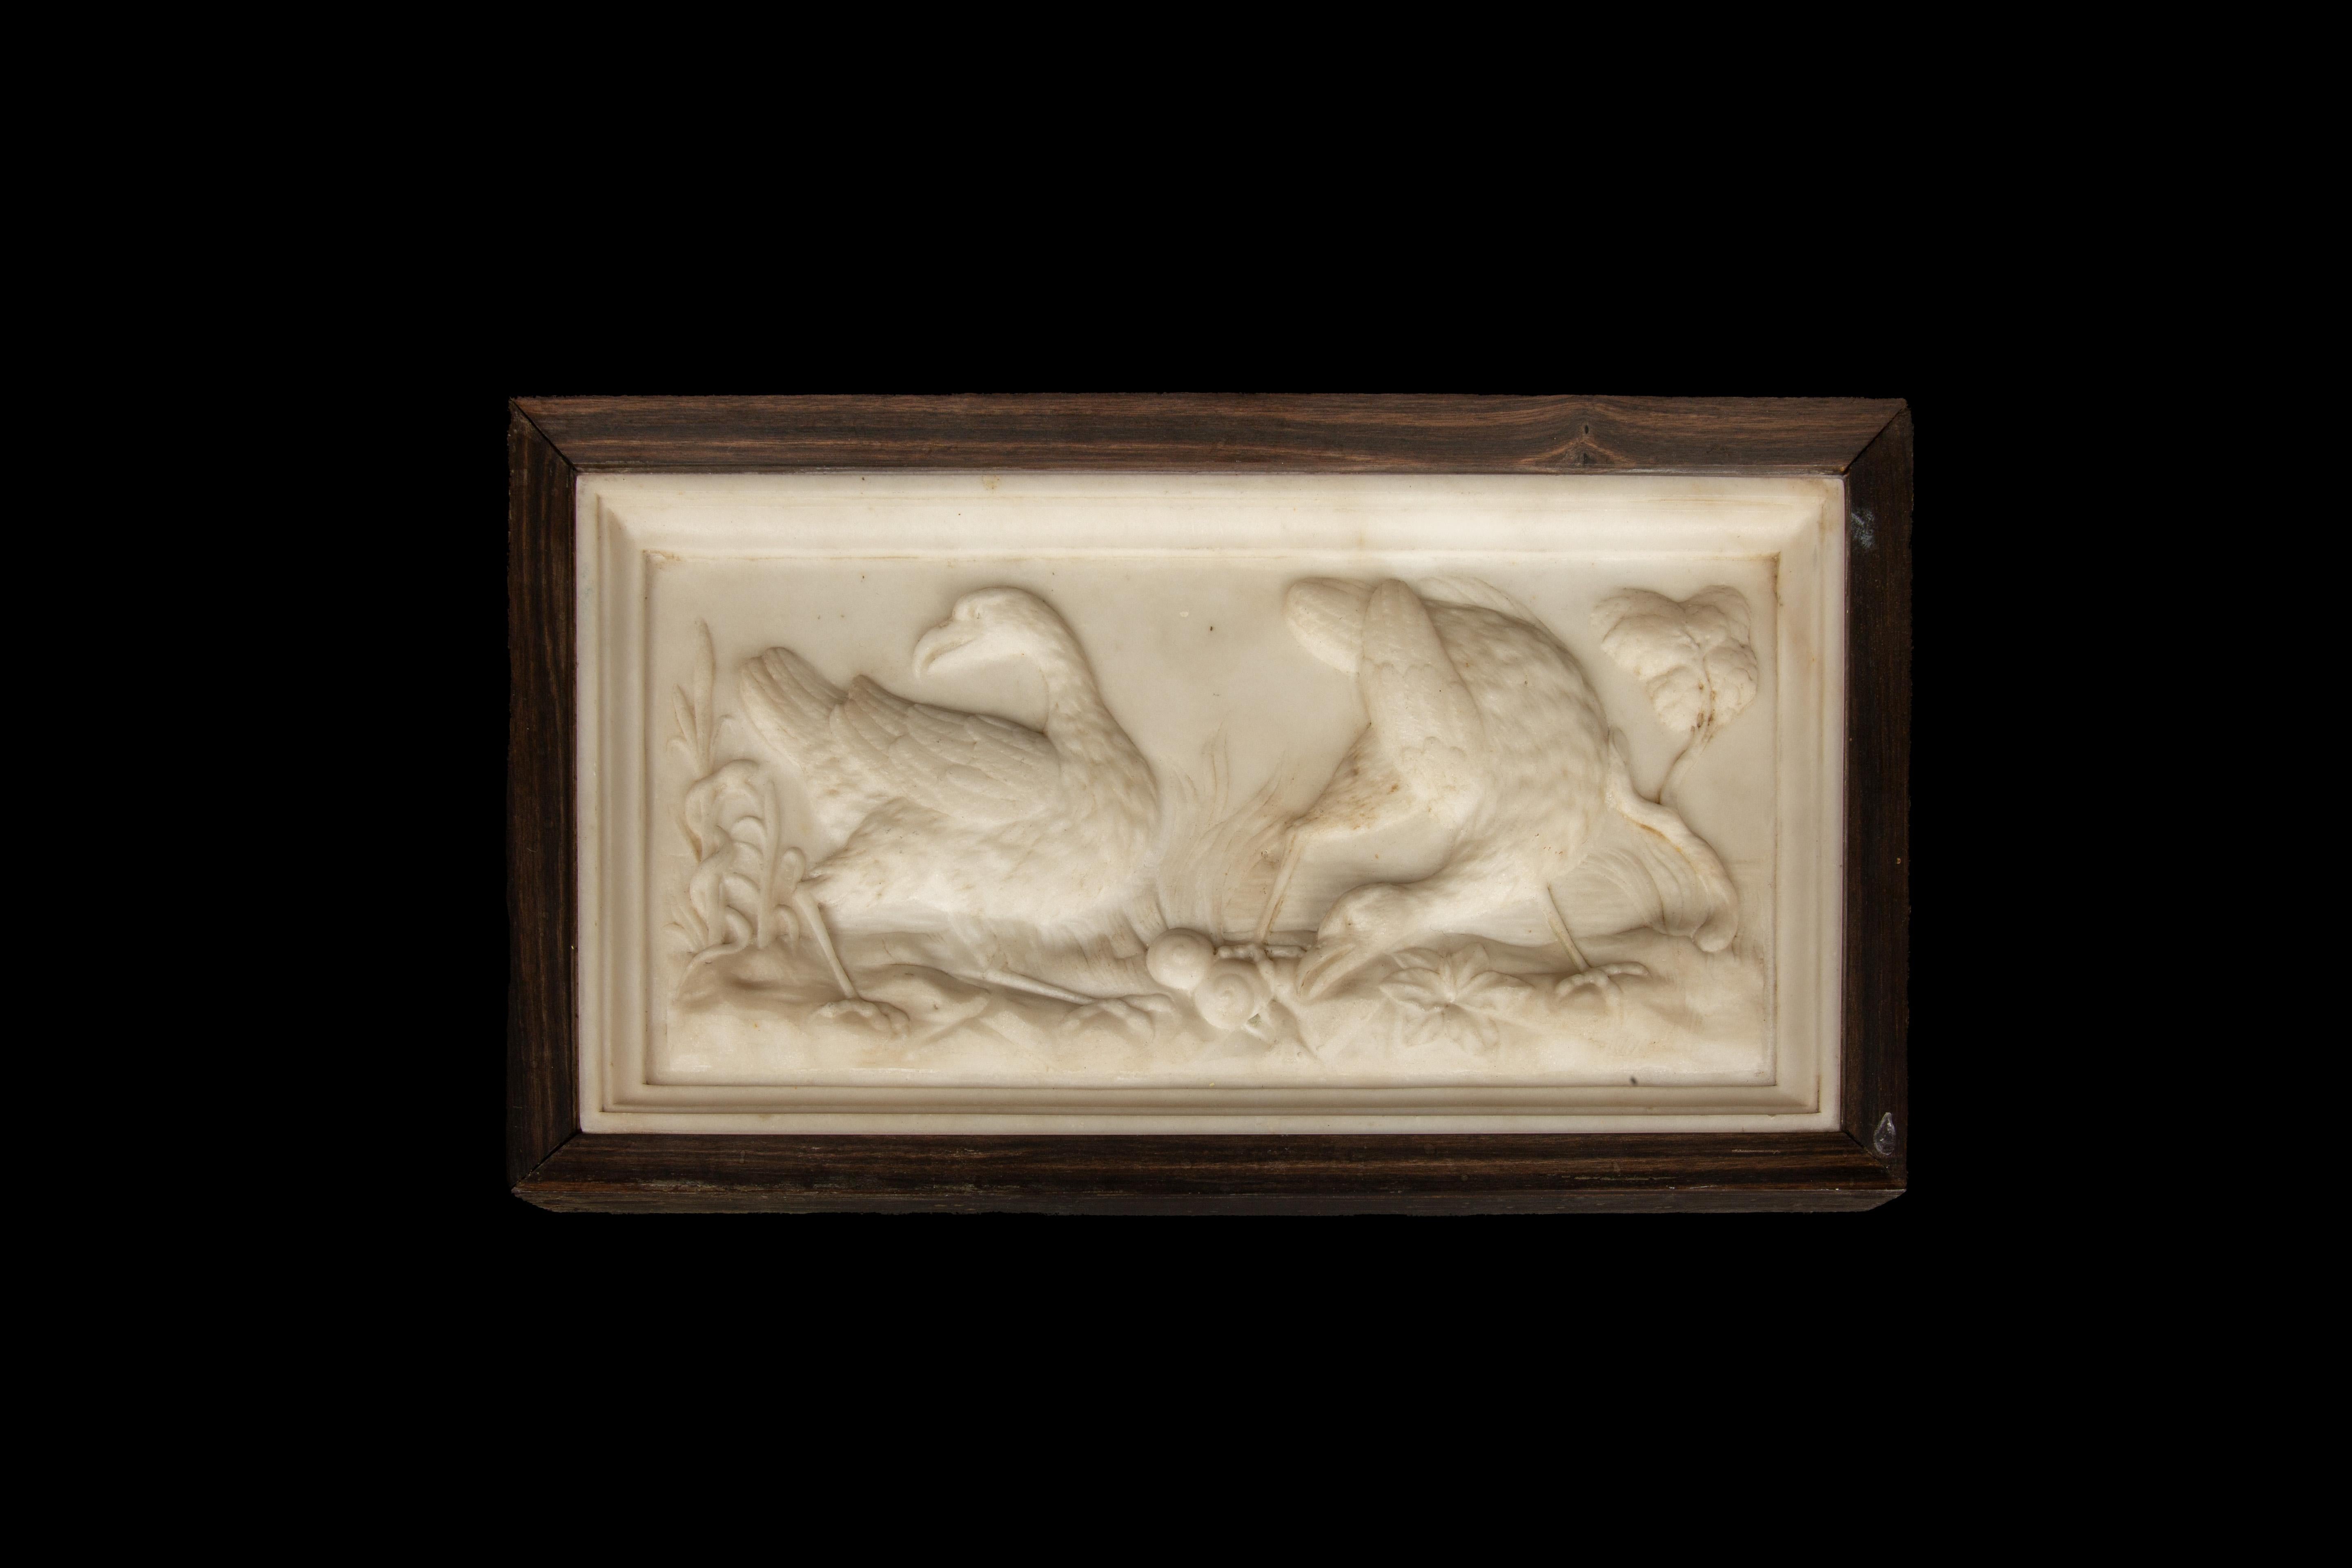 Exquisite 19th-century Italian marble relief plaque, meticulously hand-carved to capture the graceful essence of a pair of majestic bustards amidst lush vegetation. The meticulous attention to detail in this marble carving highlights the